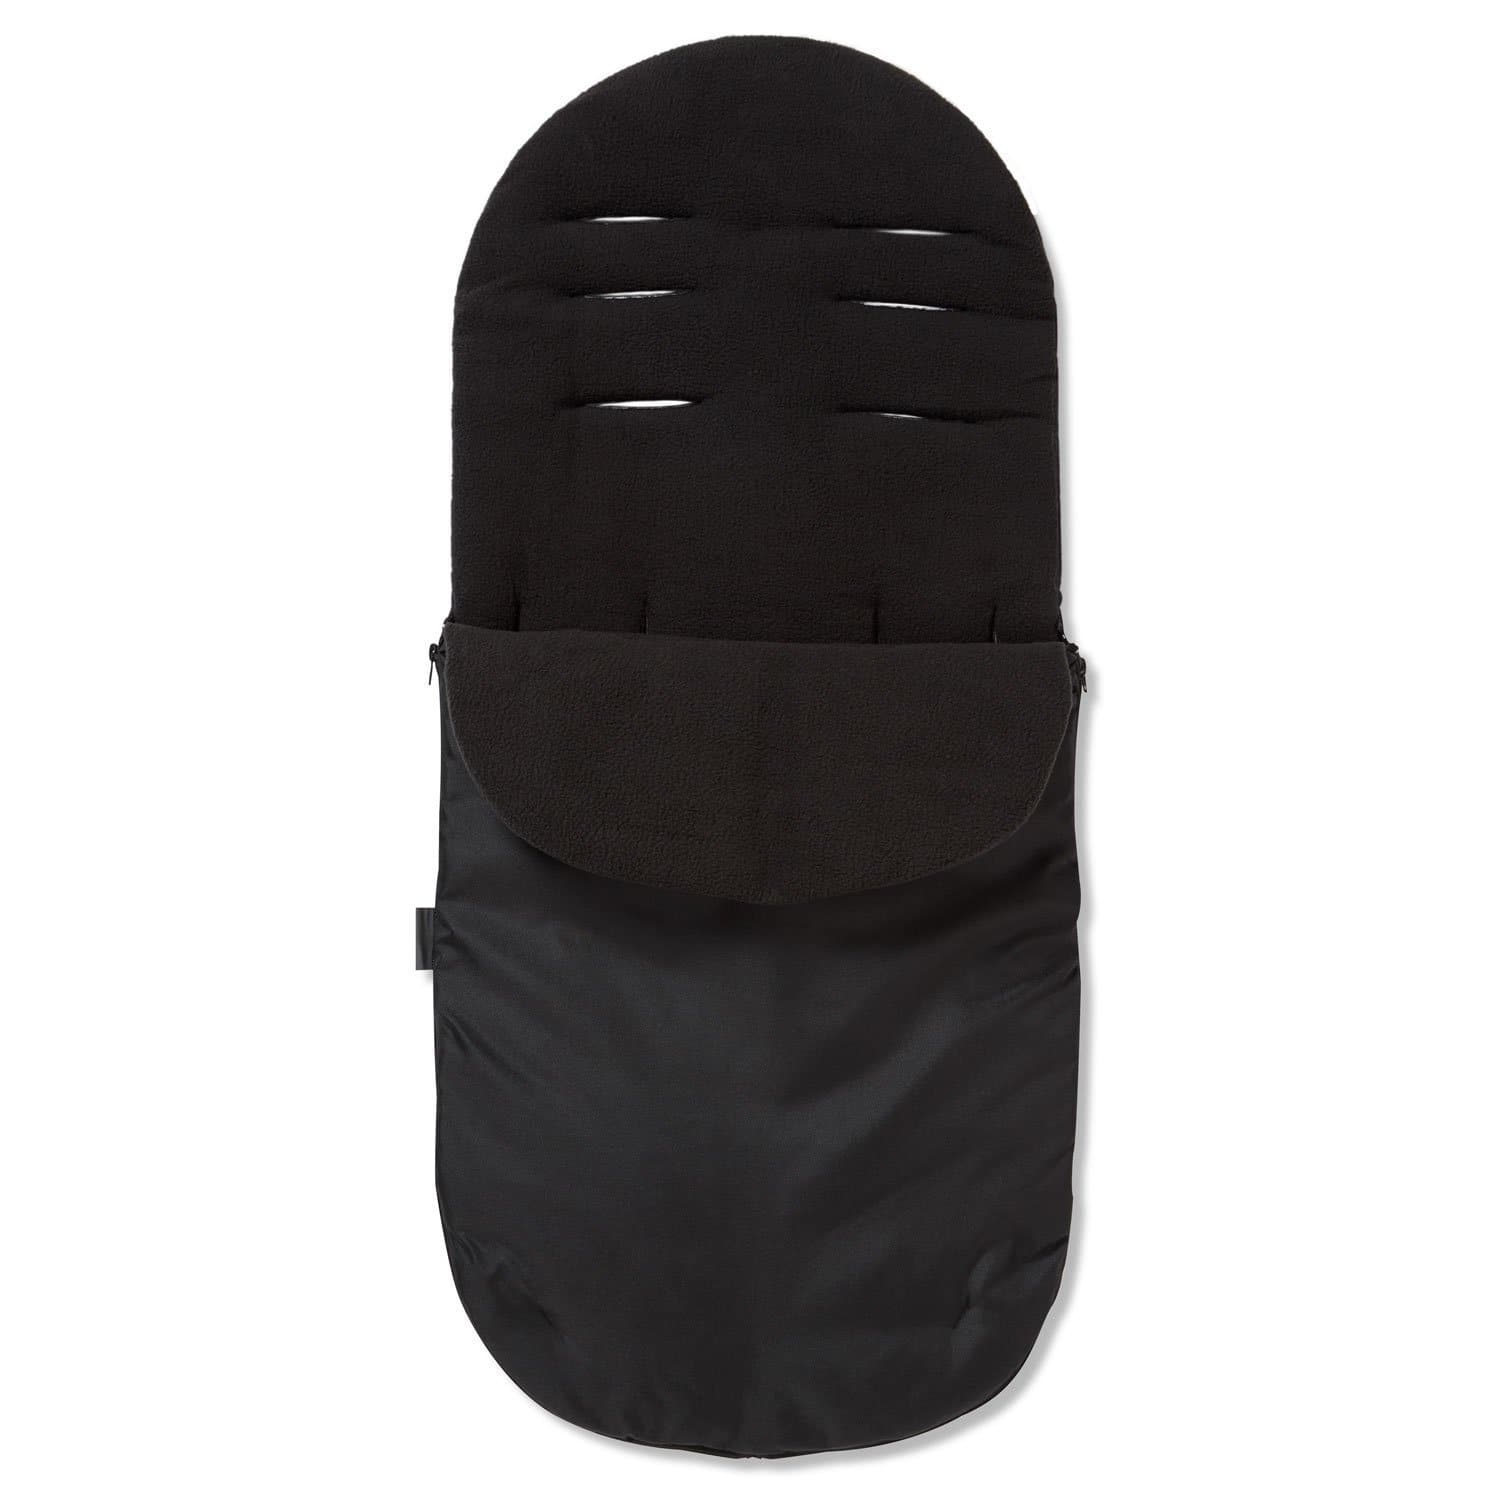 Footmuff / Cosy Toes Compatible with Quax - Black / Fits All Models | For Your Little One